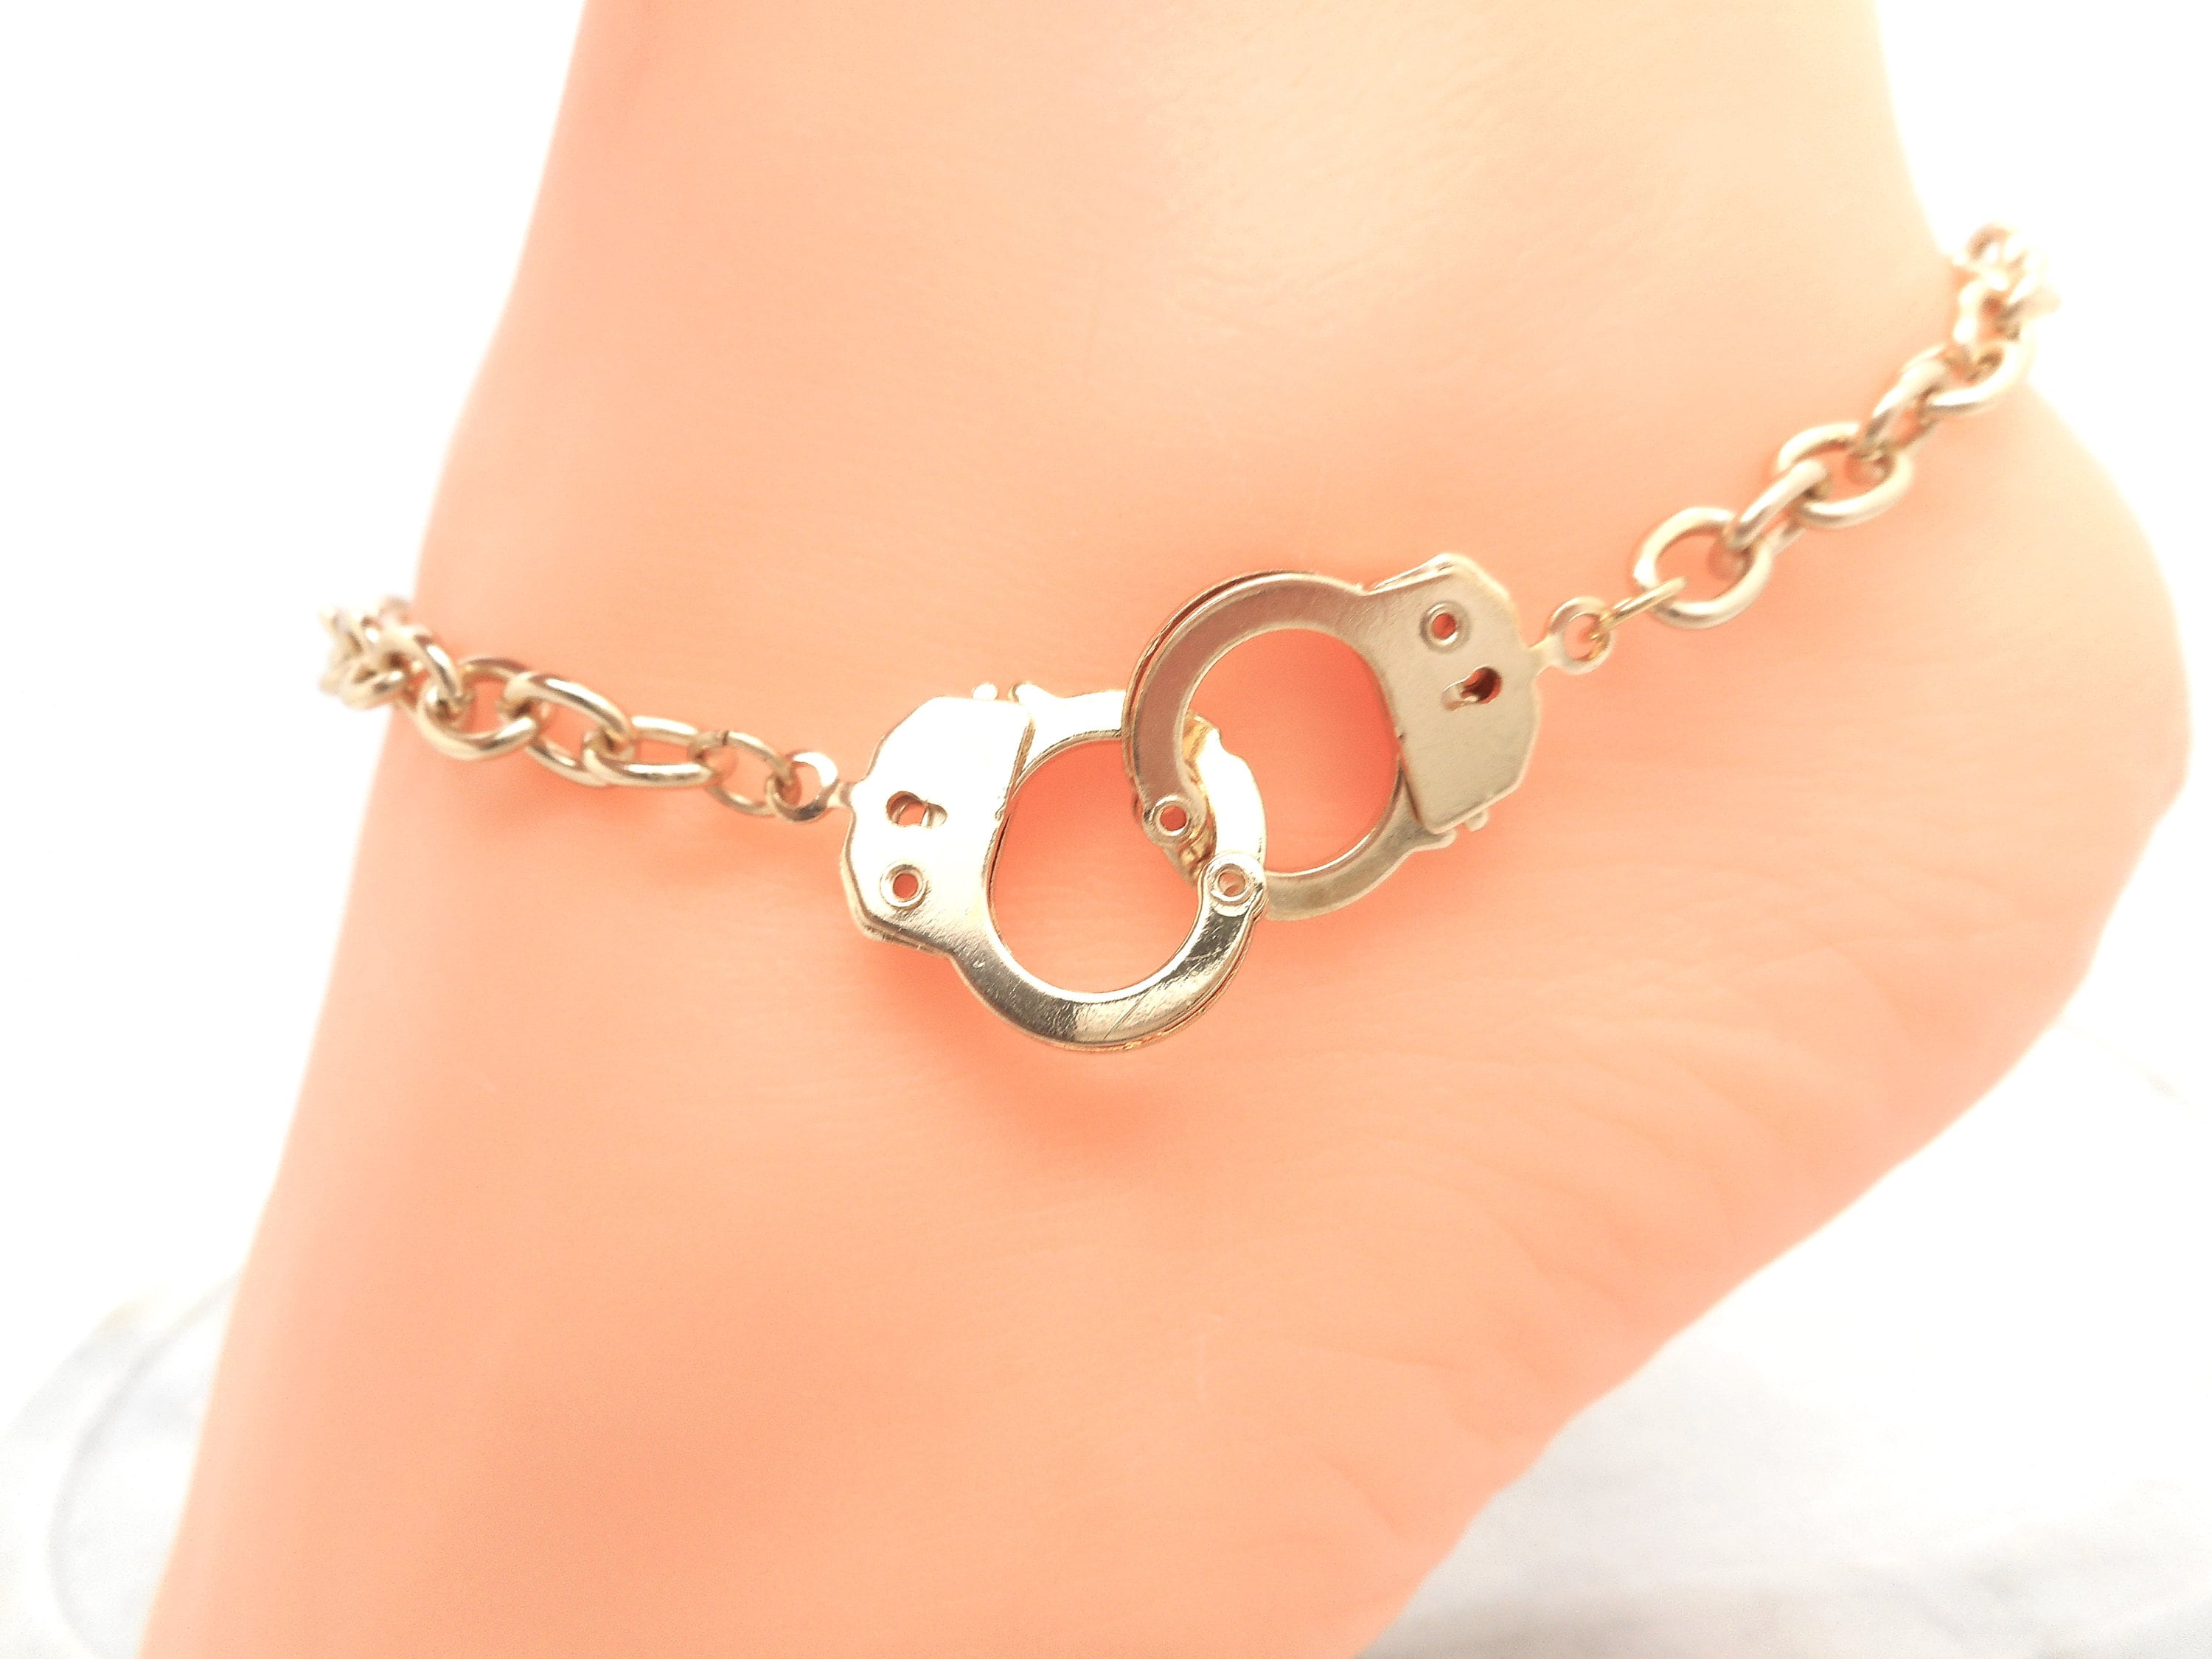 MANVEN Partners in Crime Bracelets Handcuff Matching India | Ubuy